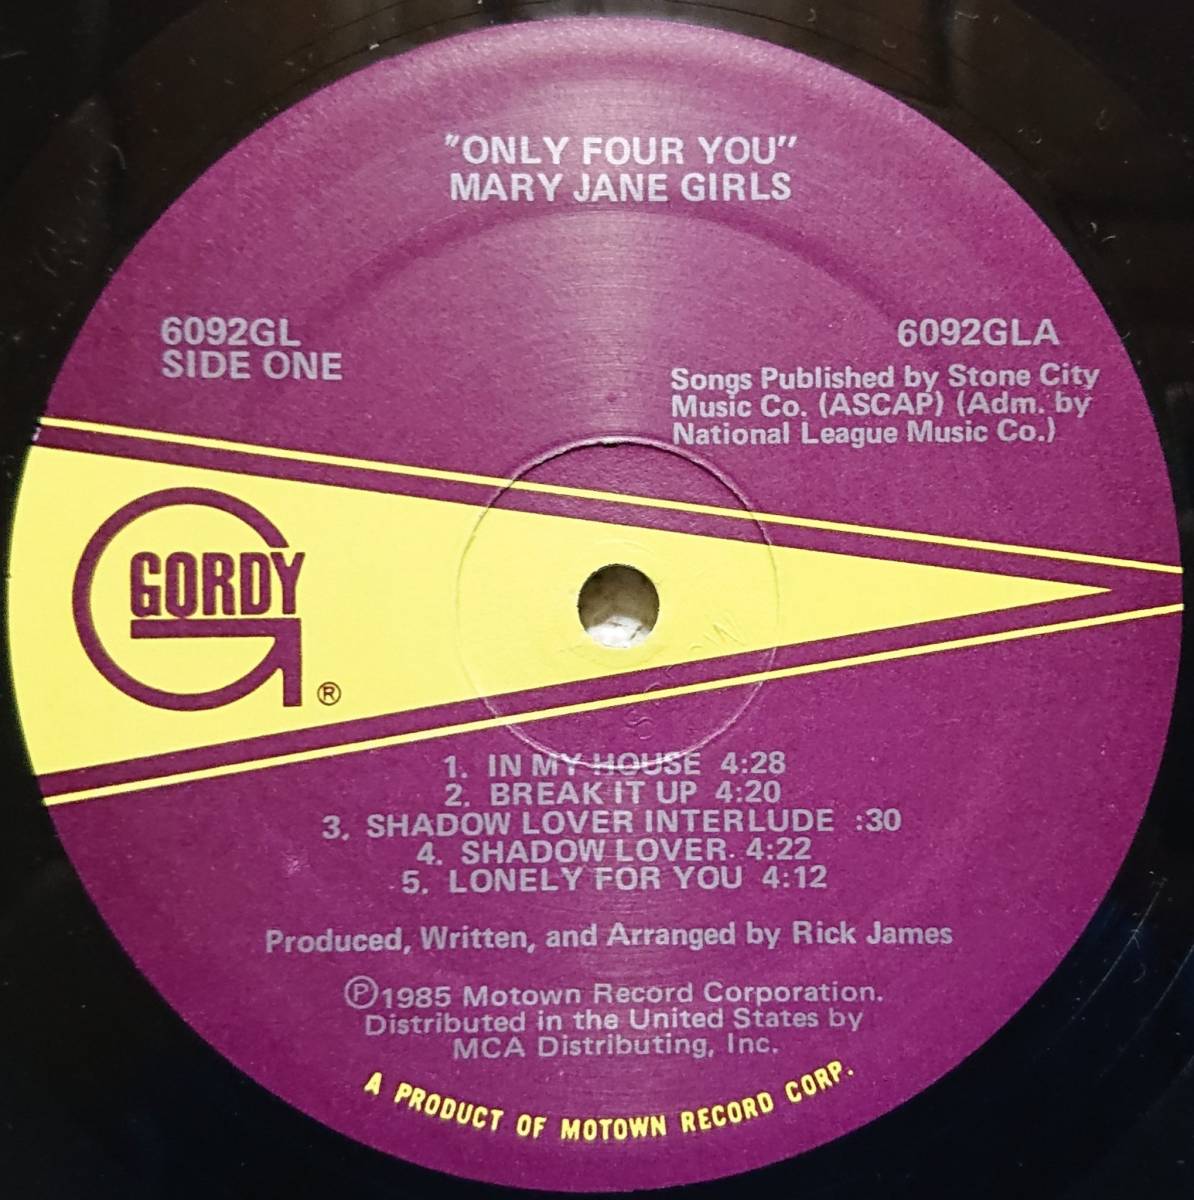 【LP Soul】Mary Jane Girls「Only Four You」オリジナル US盤 In My House 他 収録！_Side1